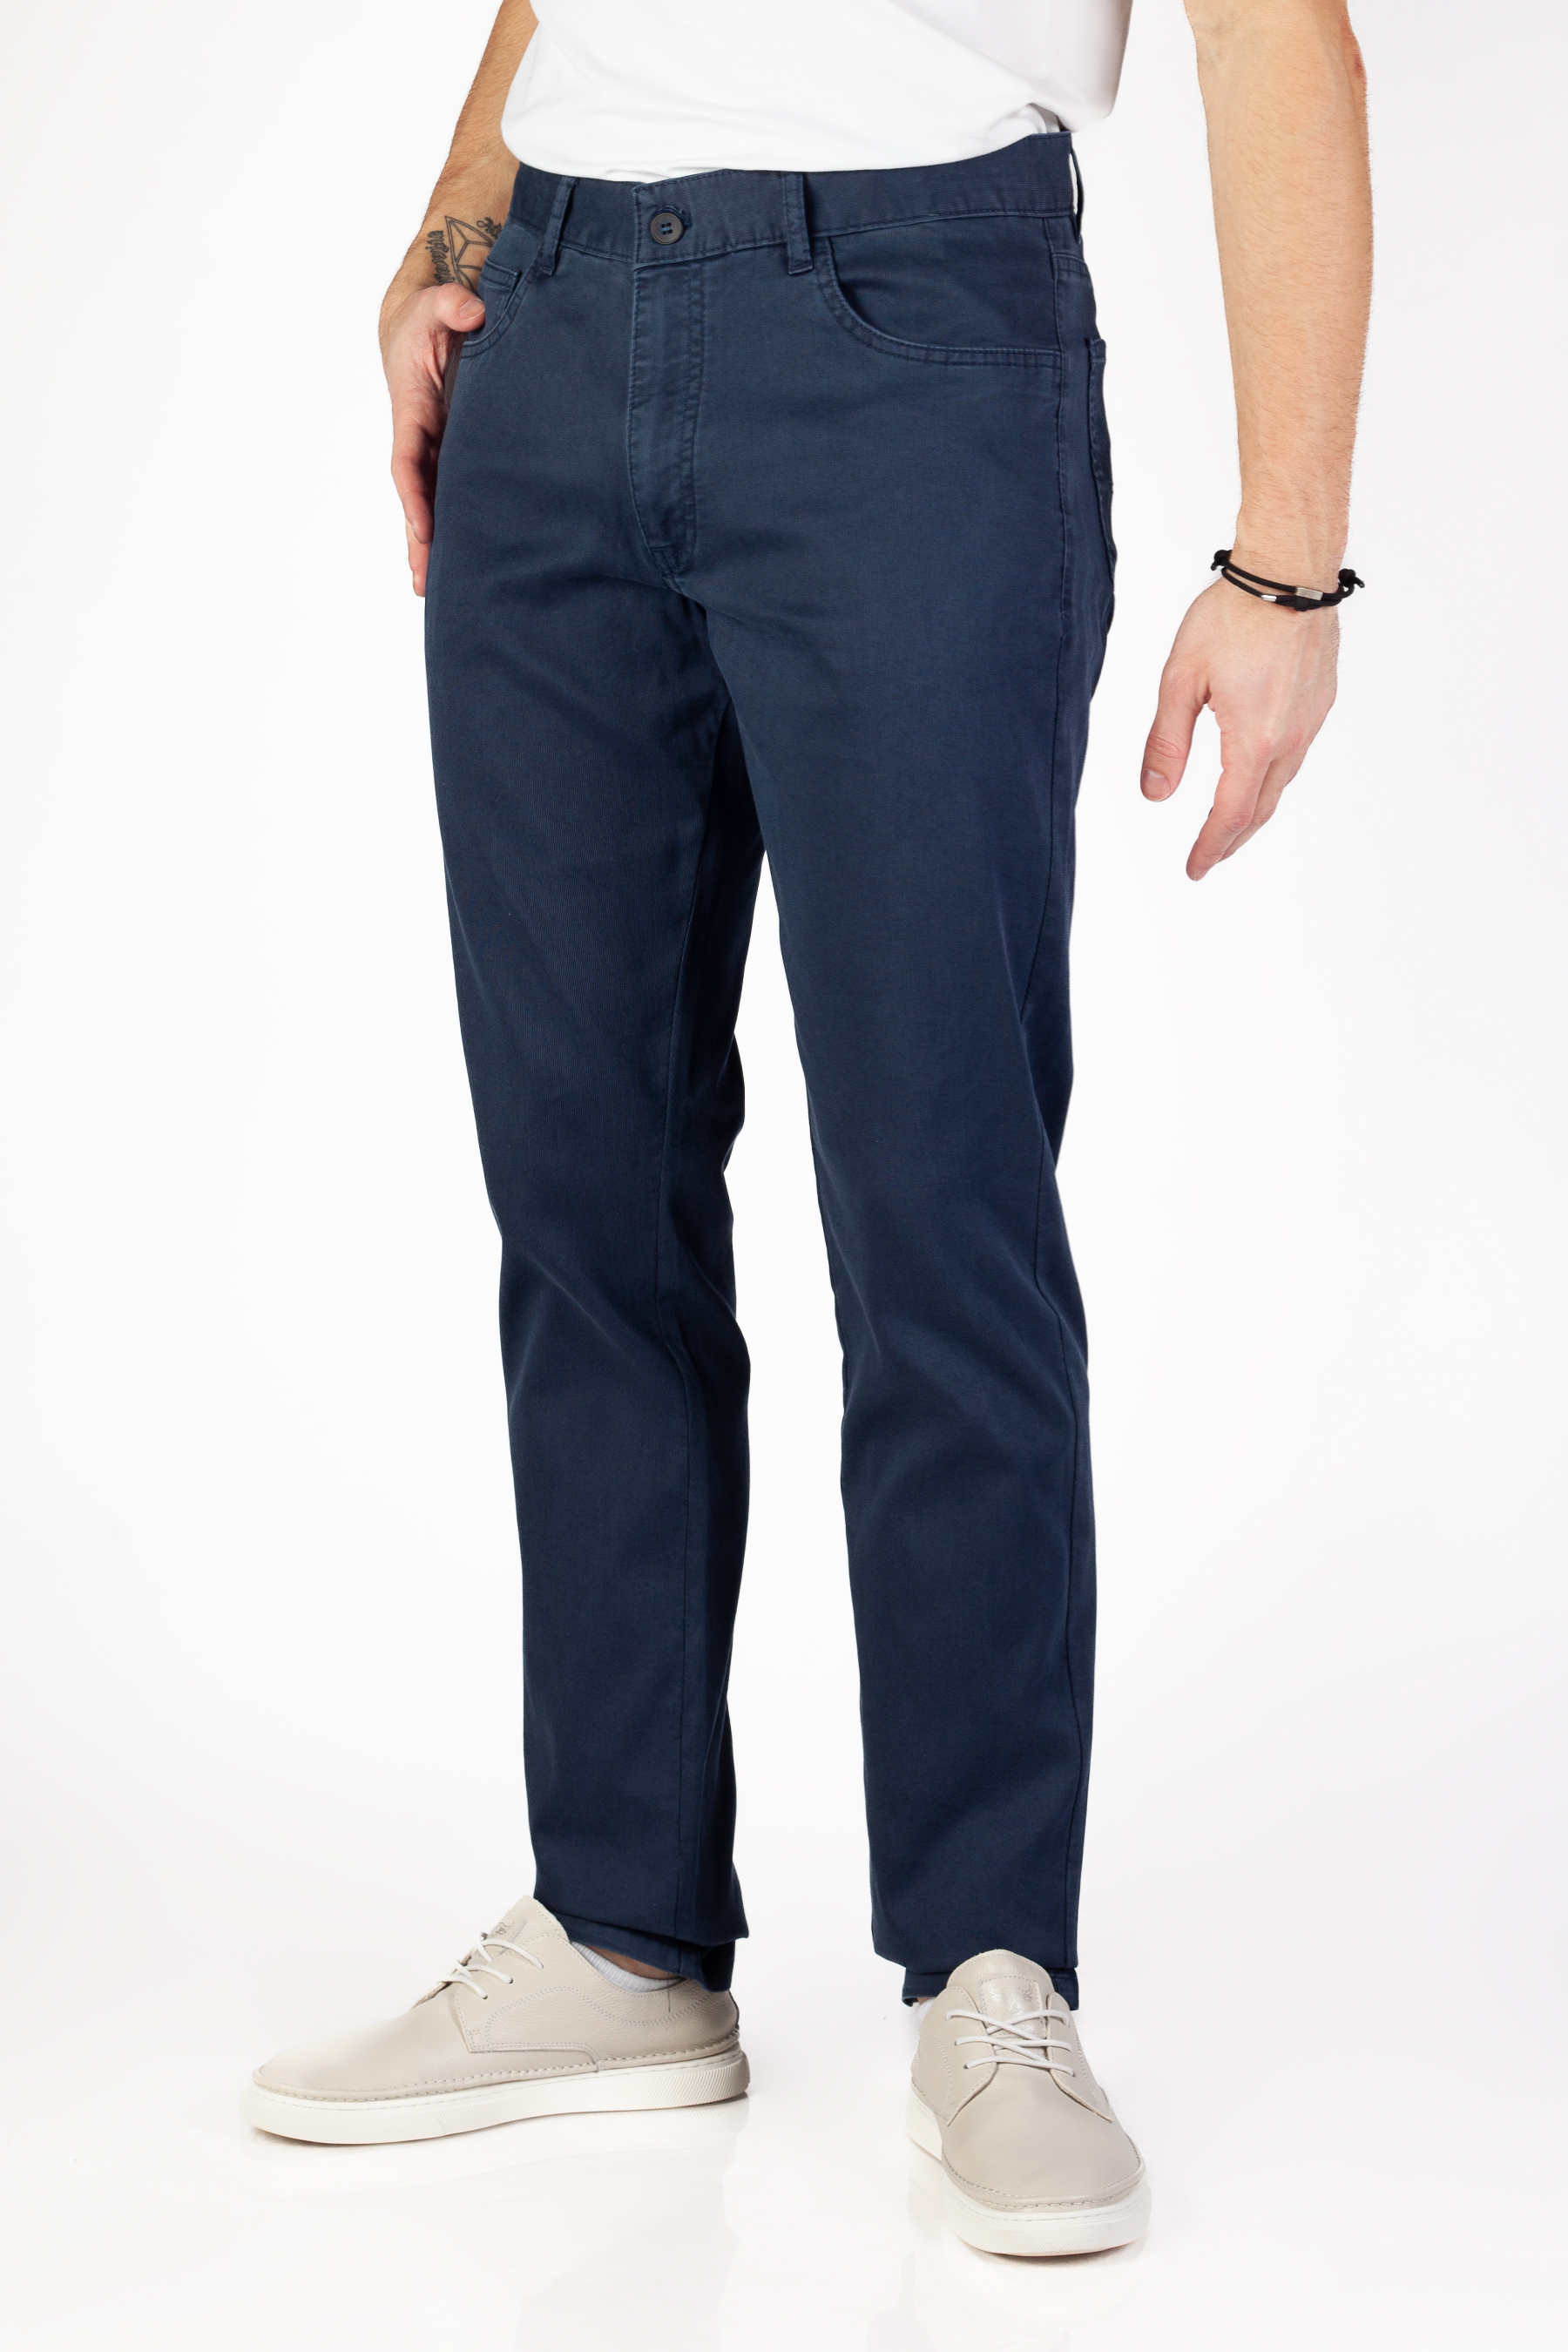 Chino pants BLK JEANS 8381-5110-105-206